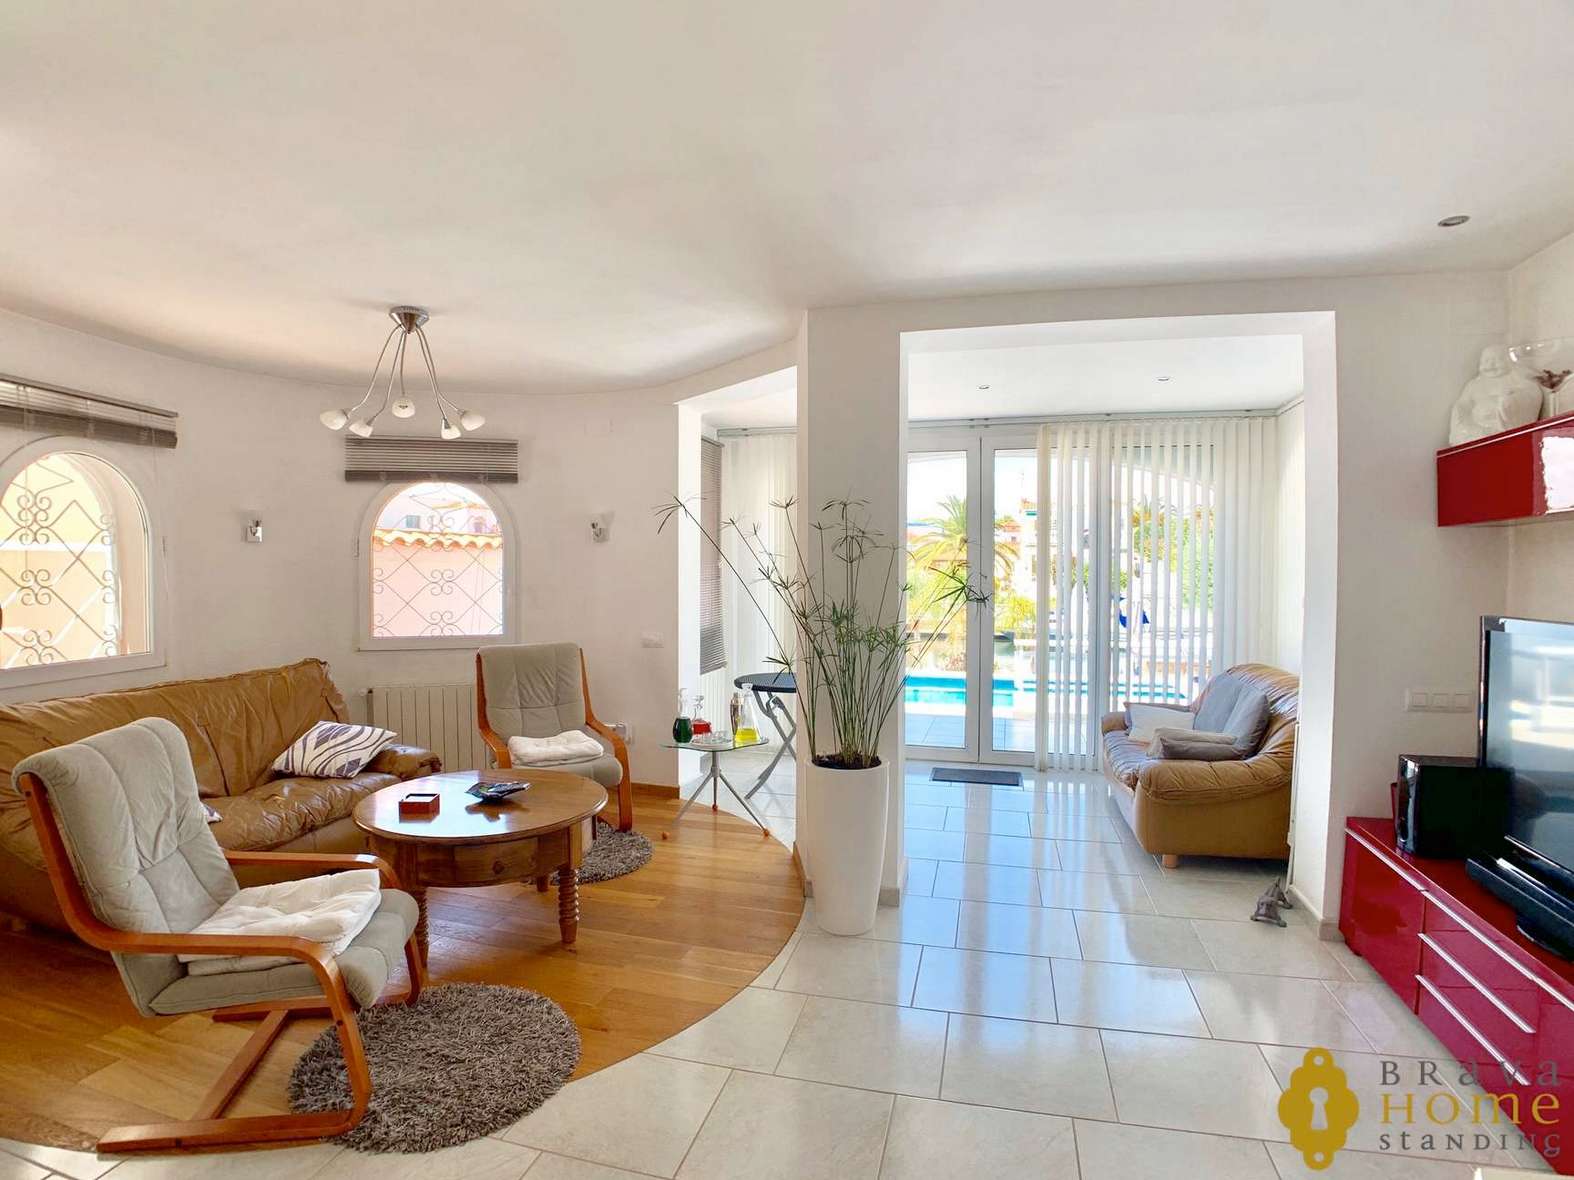 Luxury villa with Pool on a wide canal for sale in Empuriabrava